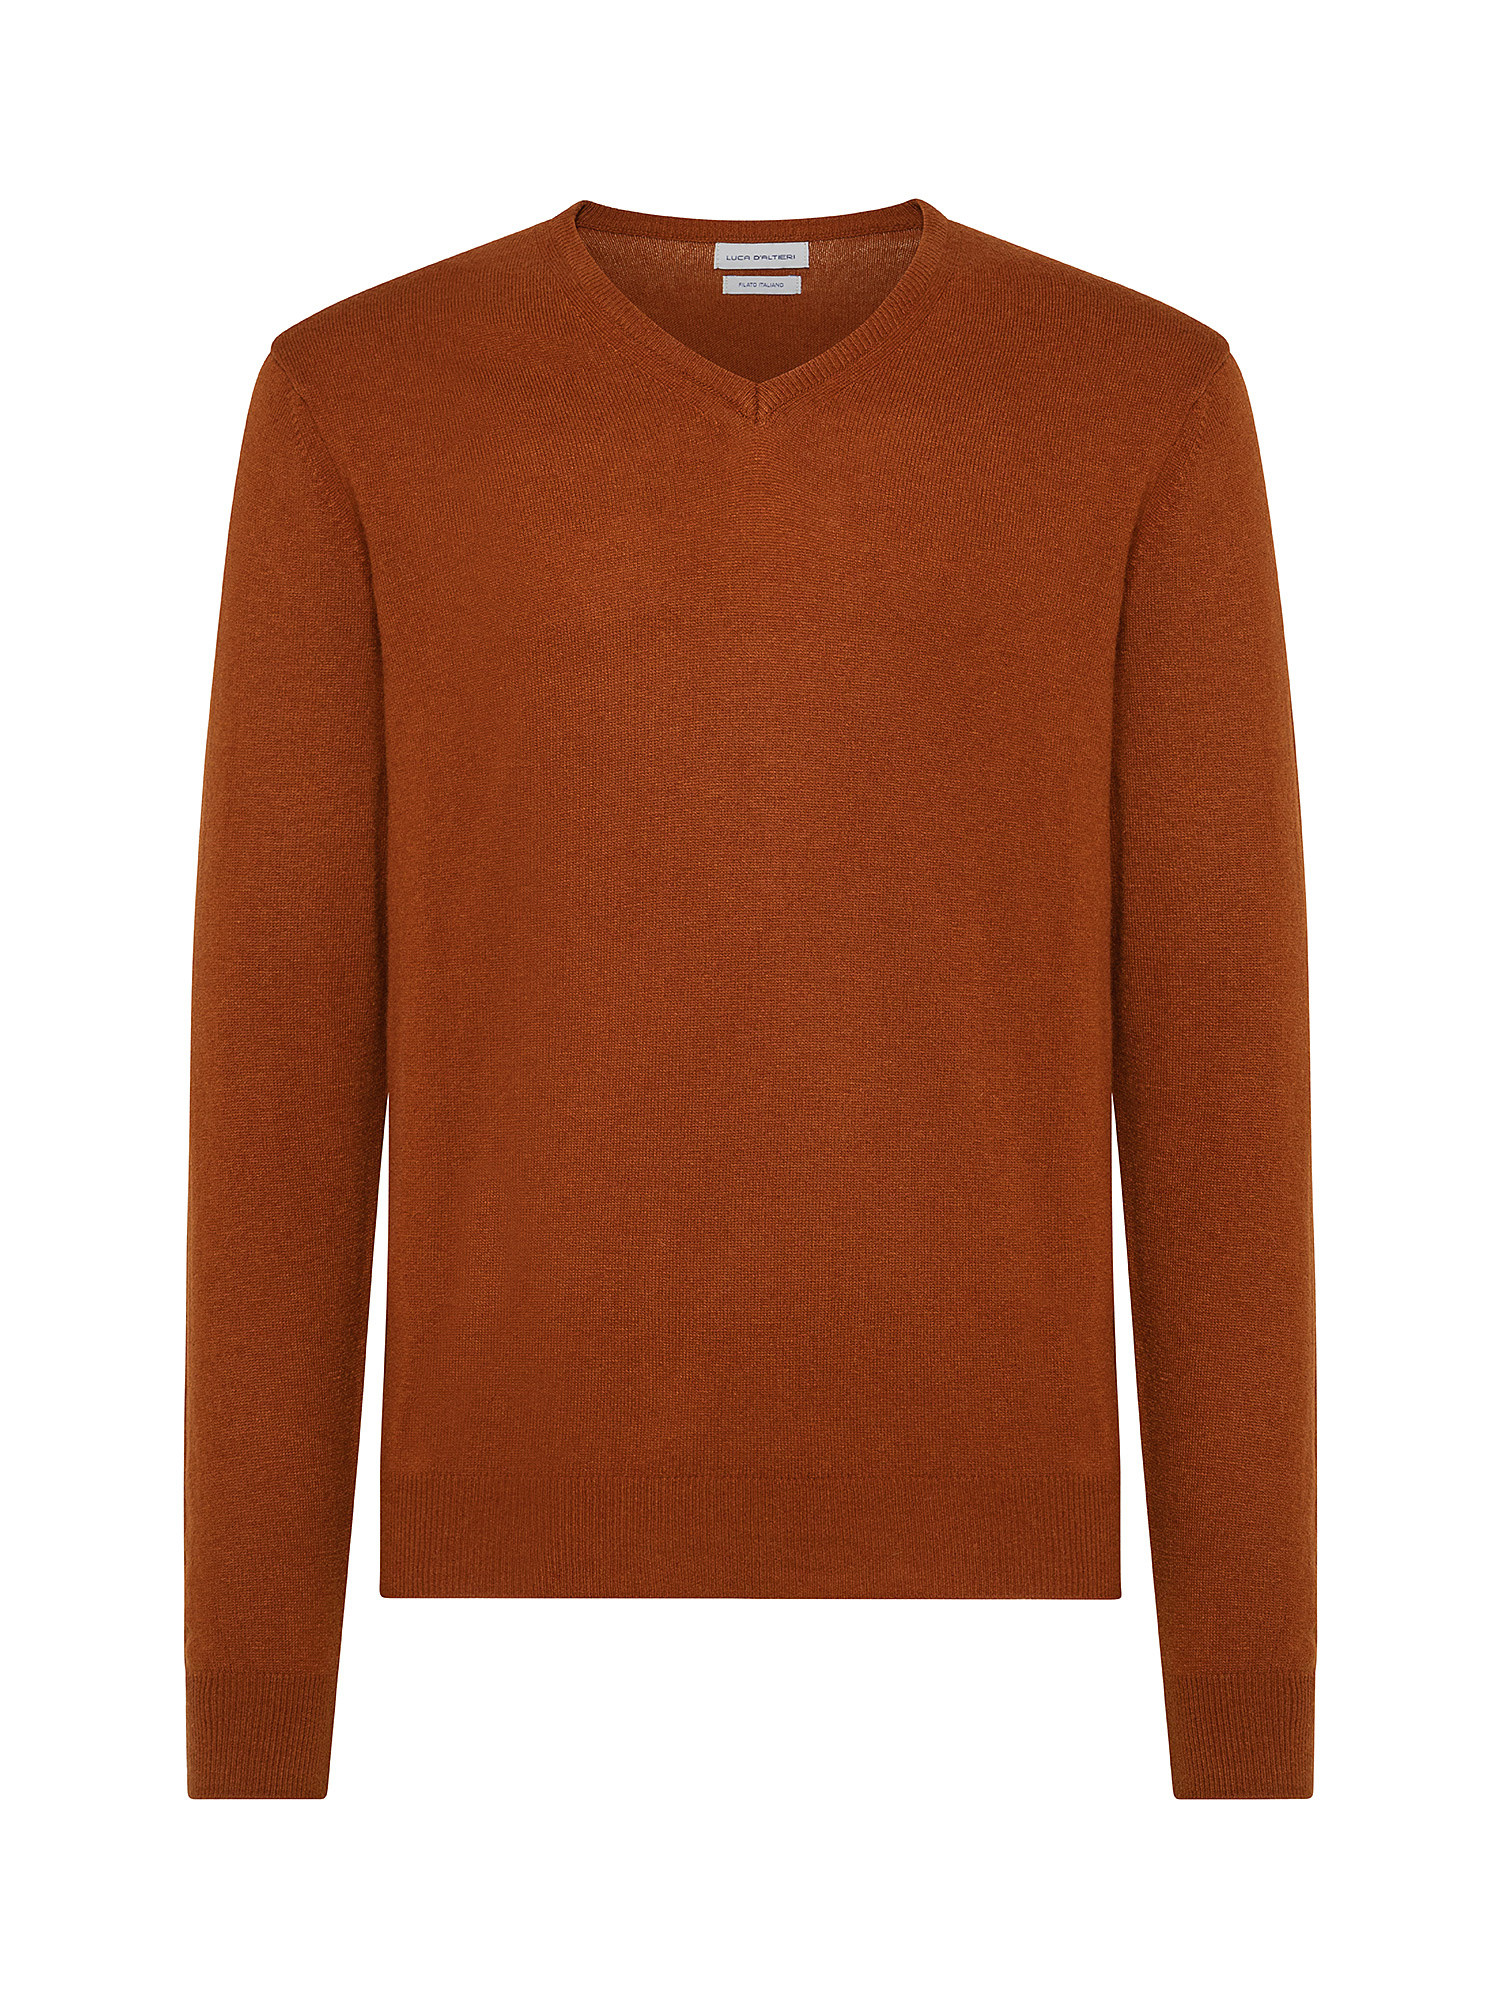 Cashmere Blend V-neck sweater with noble fibers, Copper Brown, large image number 0